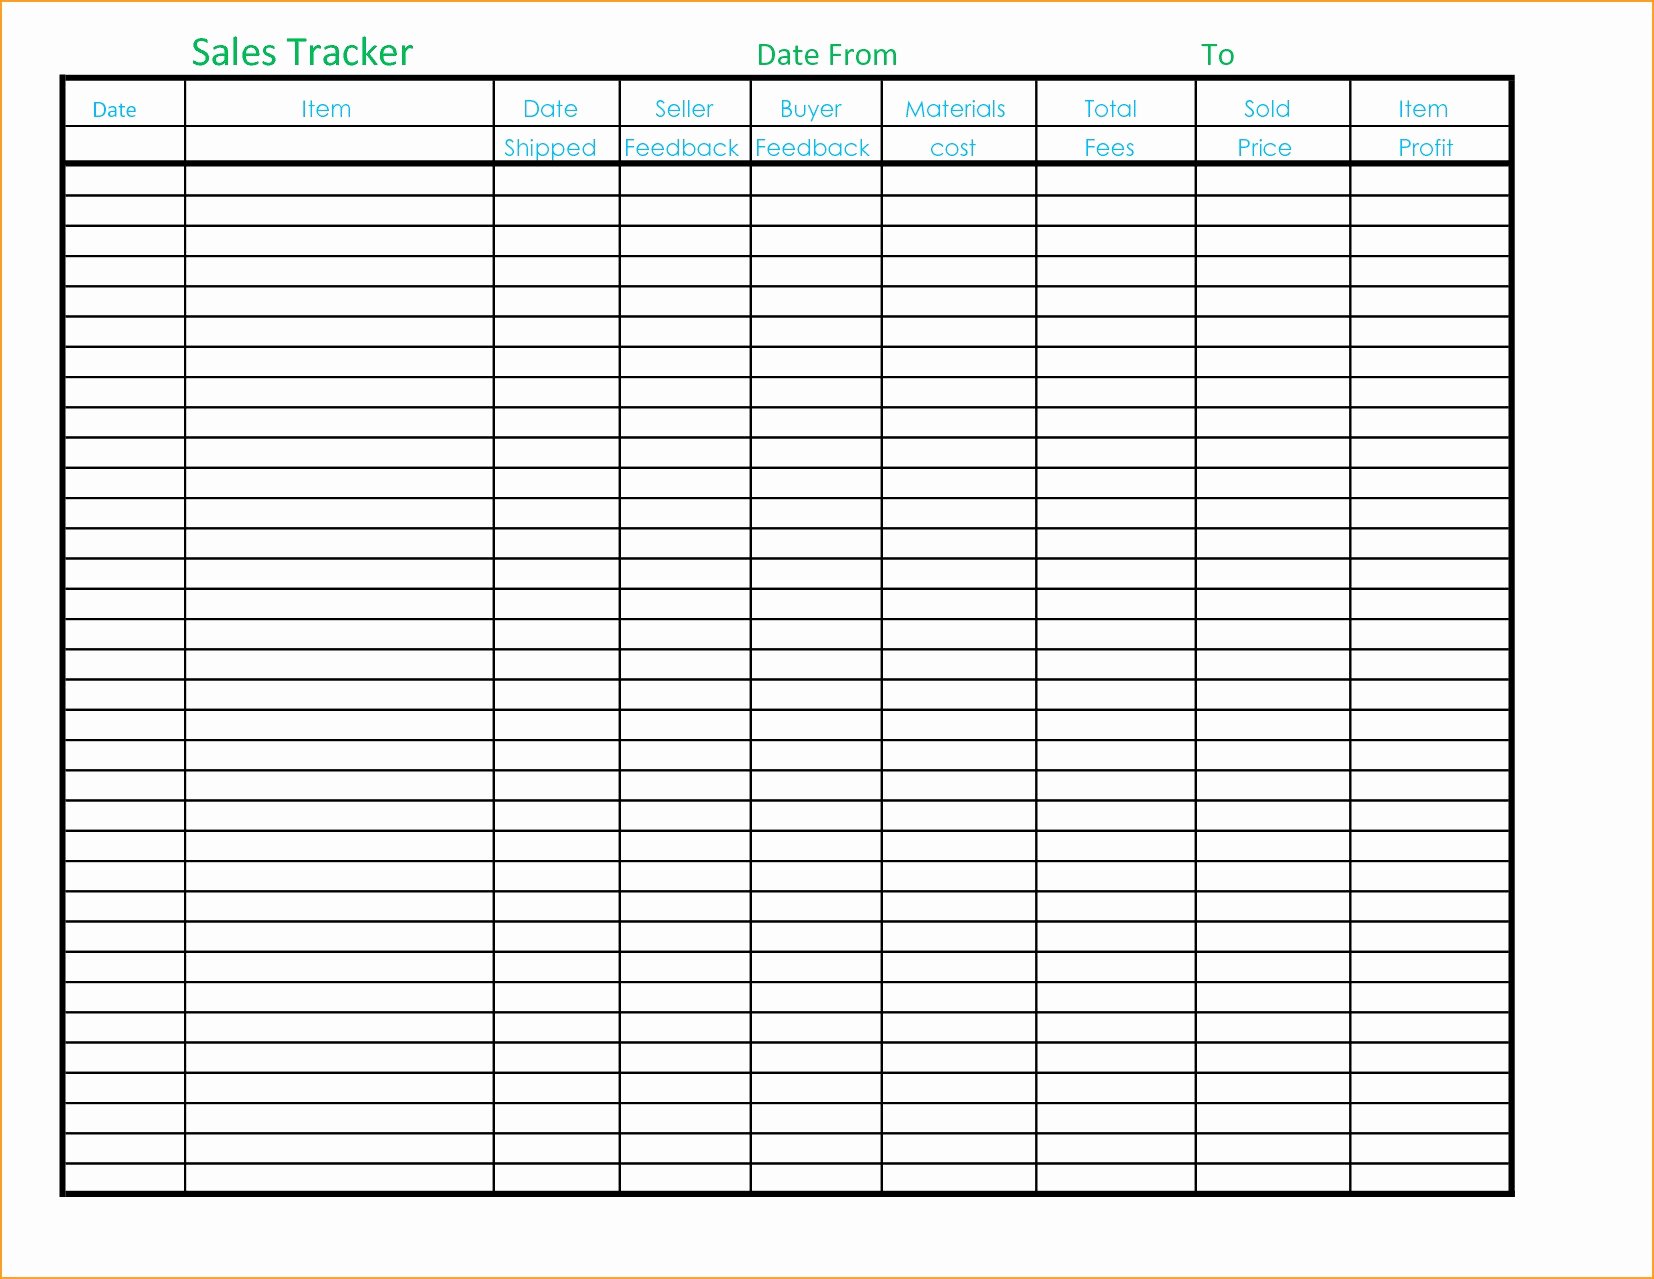 Downtime Tracker Excel Template Best Of Downtime Tracking Spreadsheet Google Spreadshee Downtime